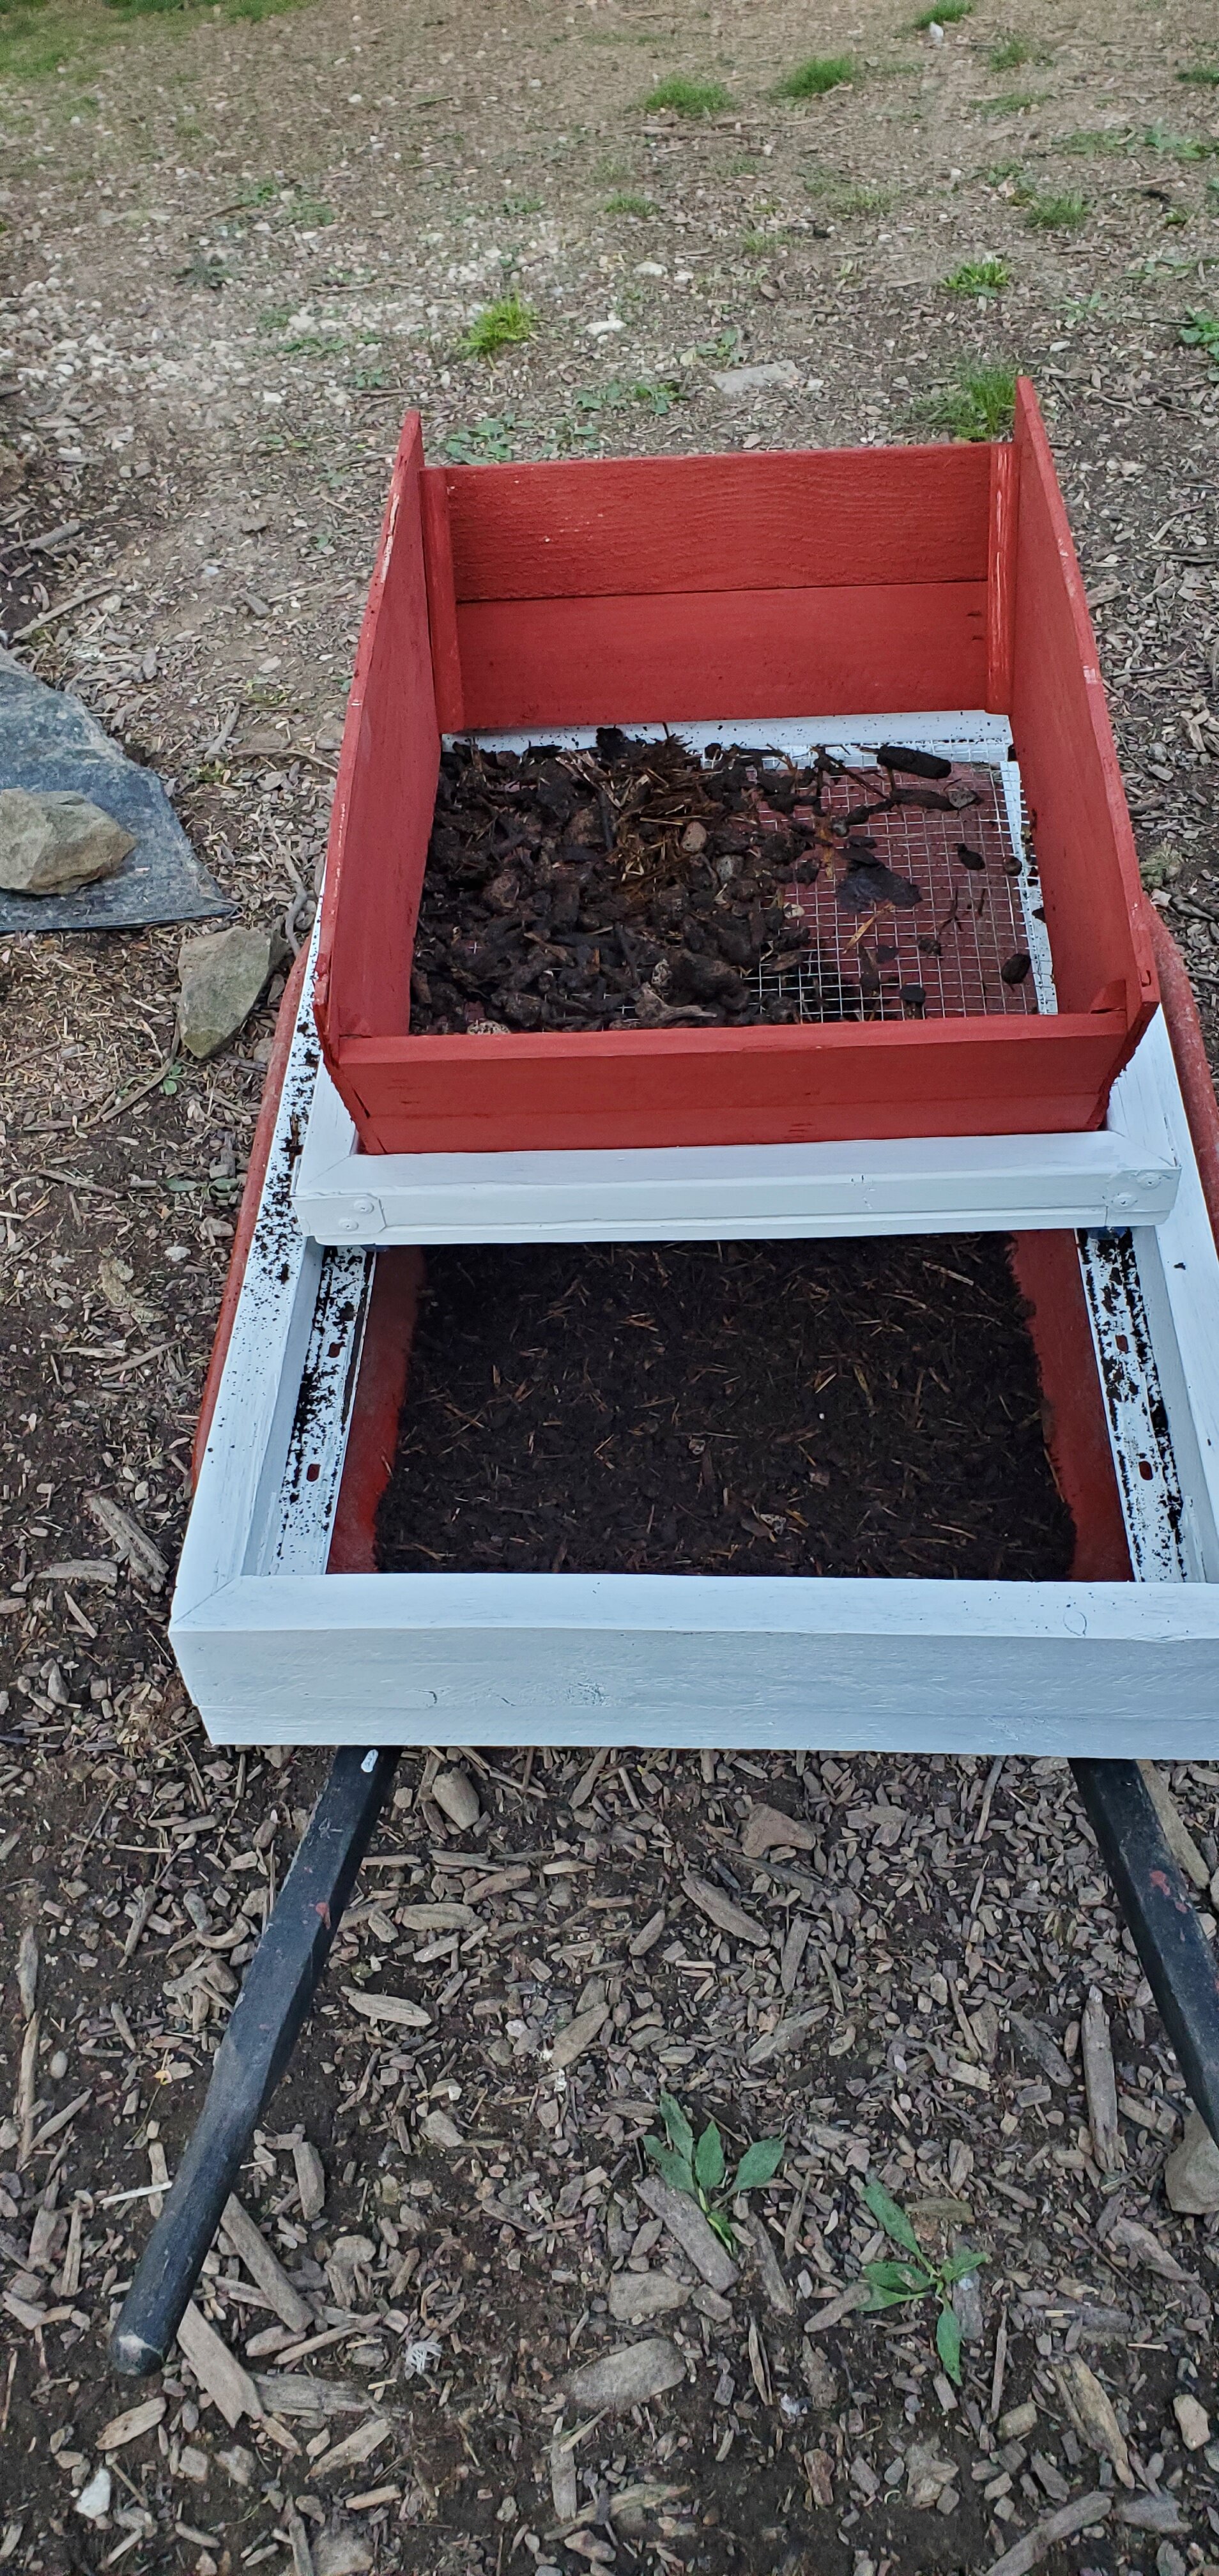 Compost sifter mounted on the wheelbarrow